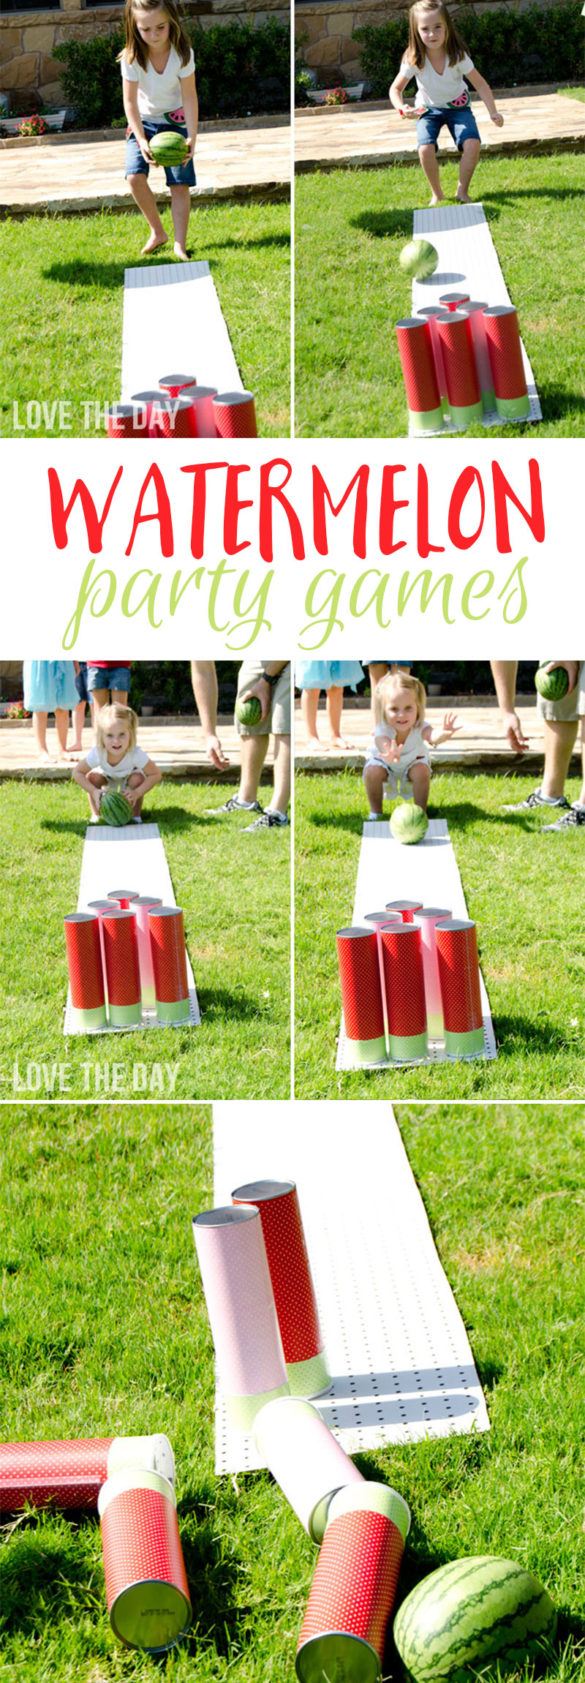 Watermelon Party Activities, Games and Crafts by Love The Day